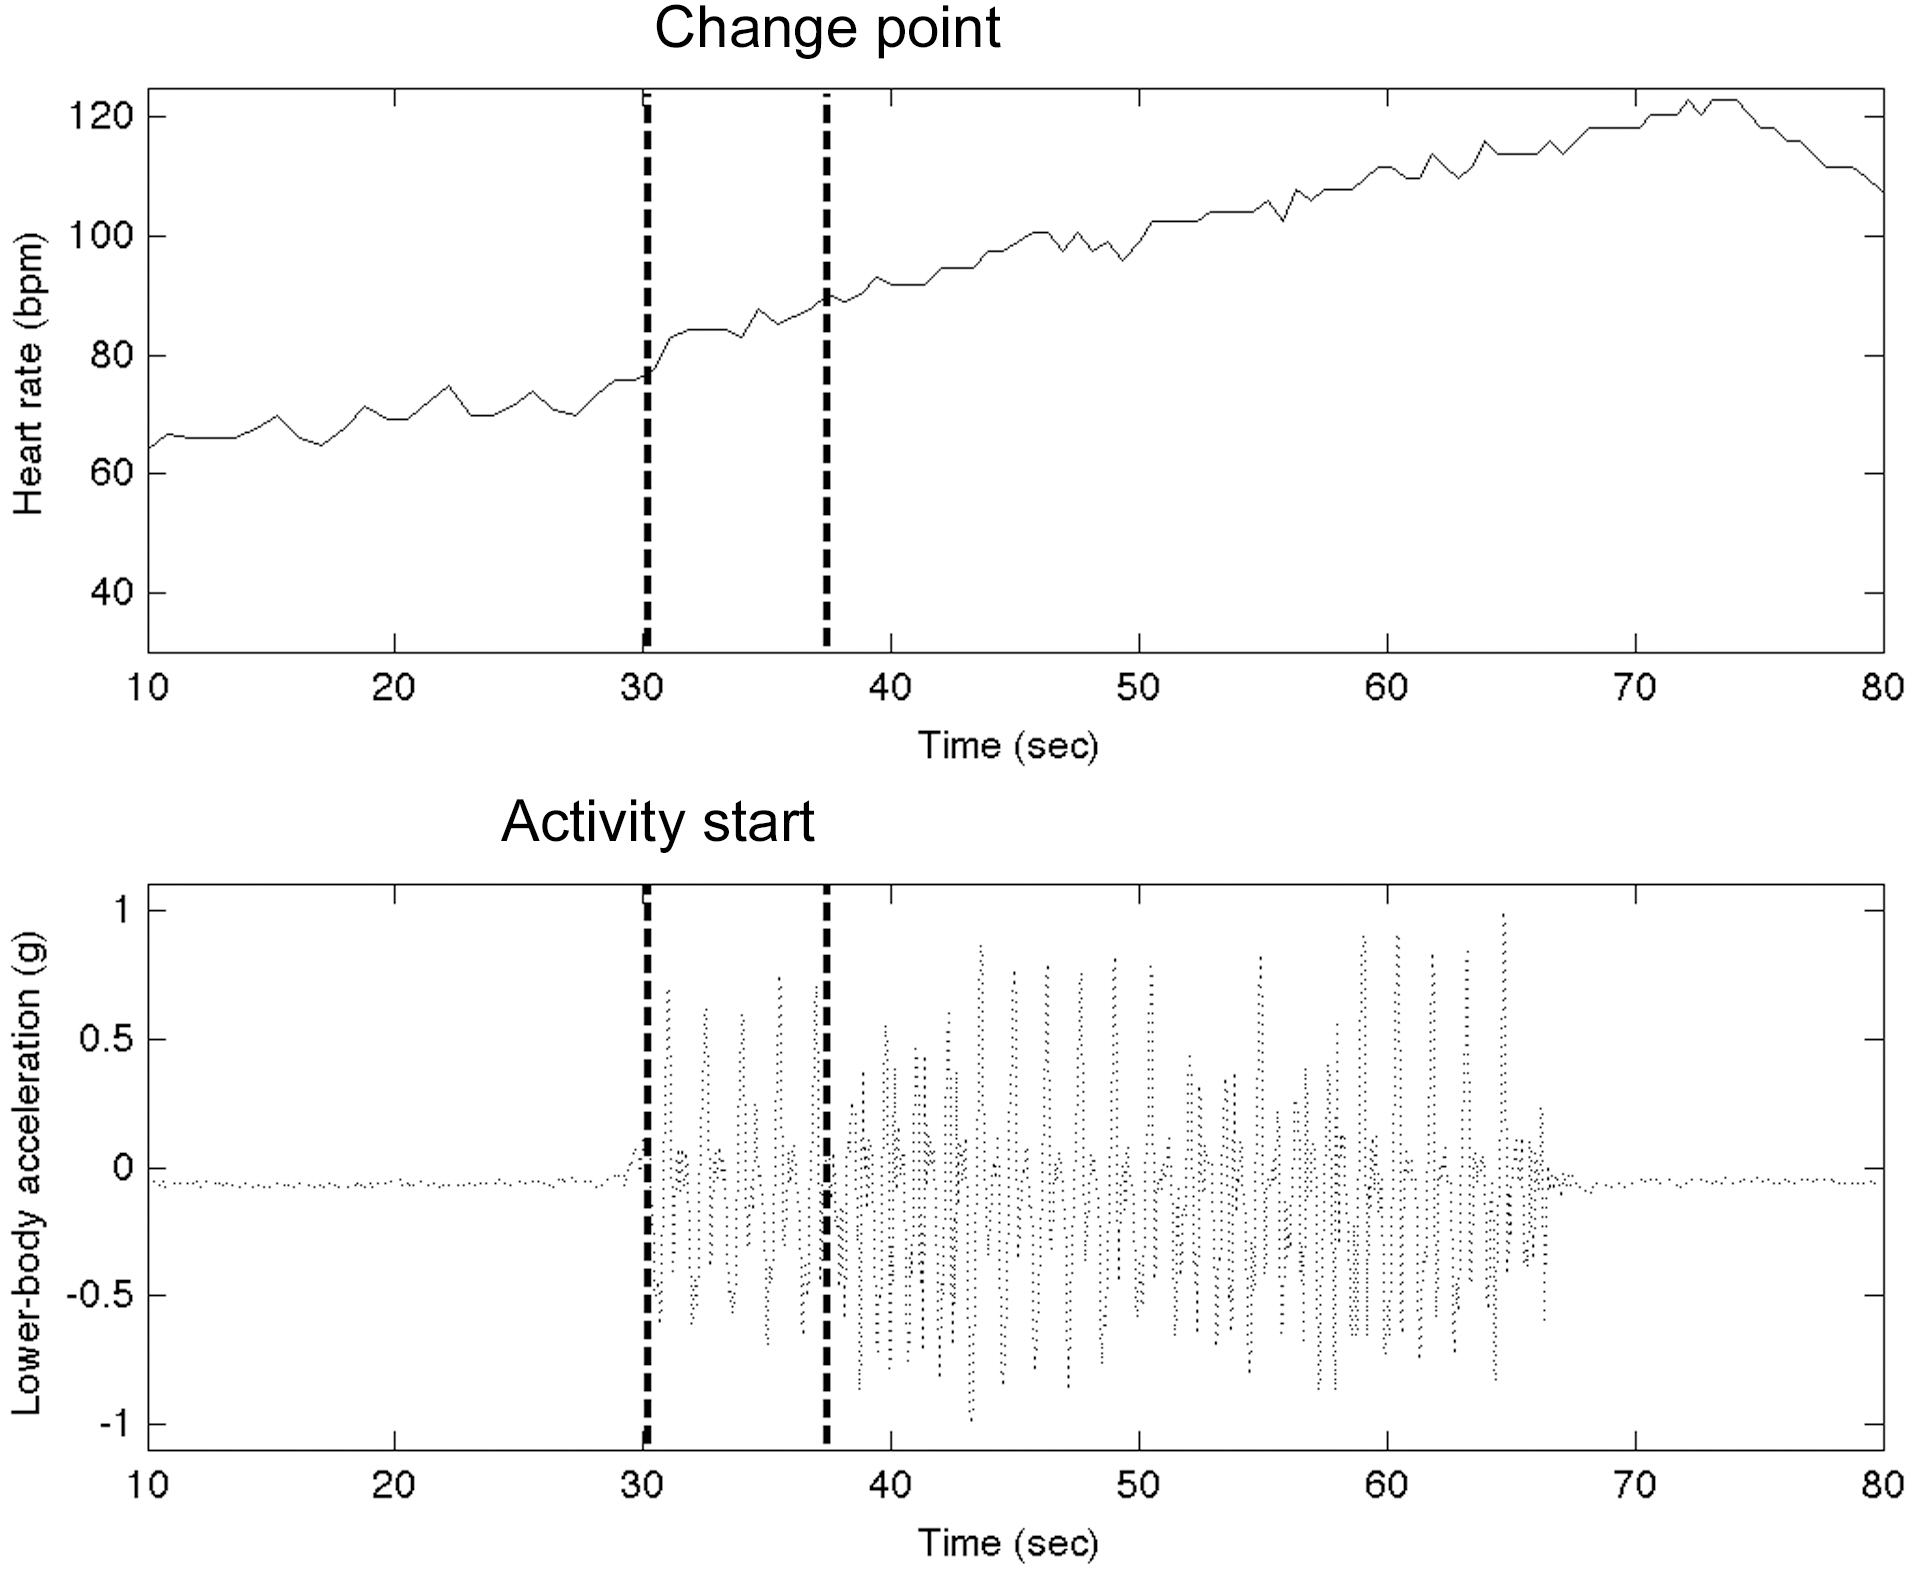 Example of change of heart rate detected by Cumulative SumControl Charts (upper graph) correlated with acceleration values (lowergraph) for the scenario of changing from no motion to ascending a flightof stairs.